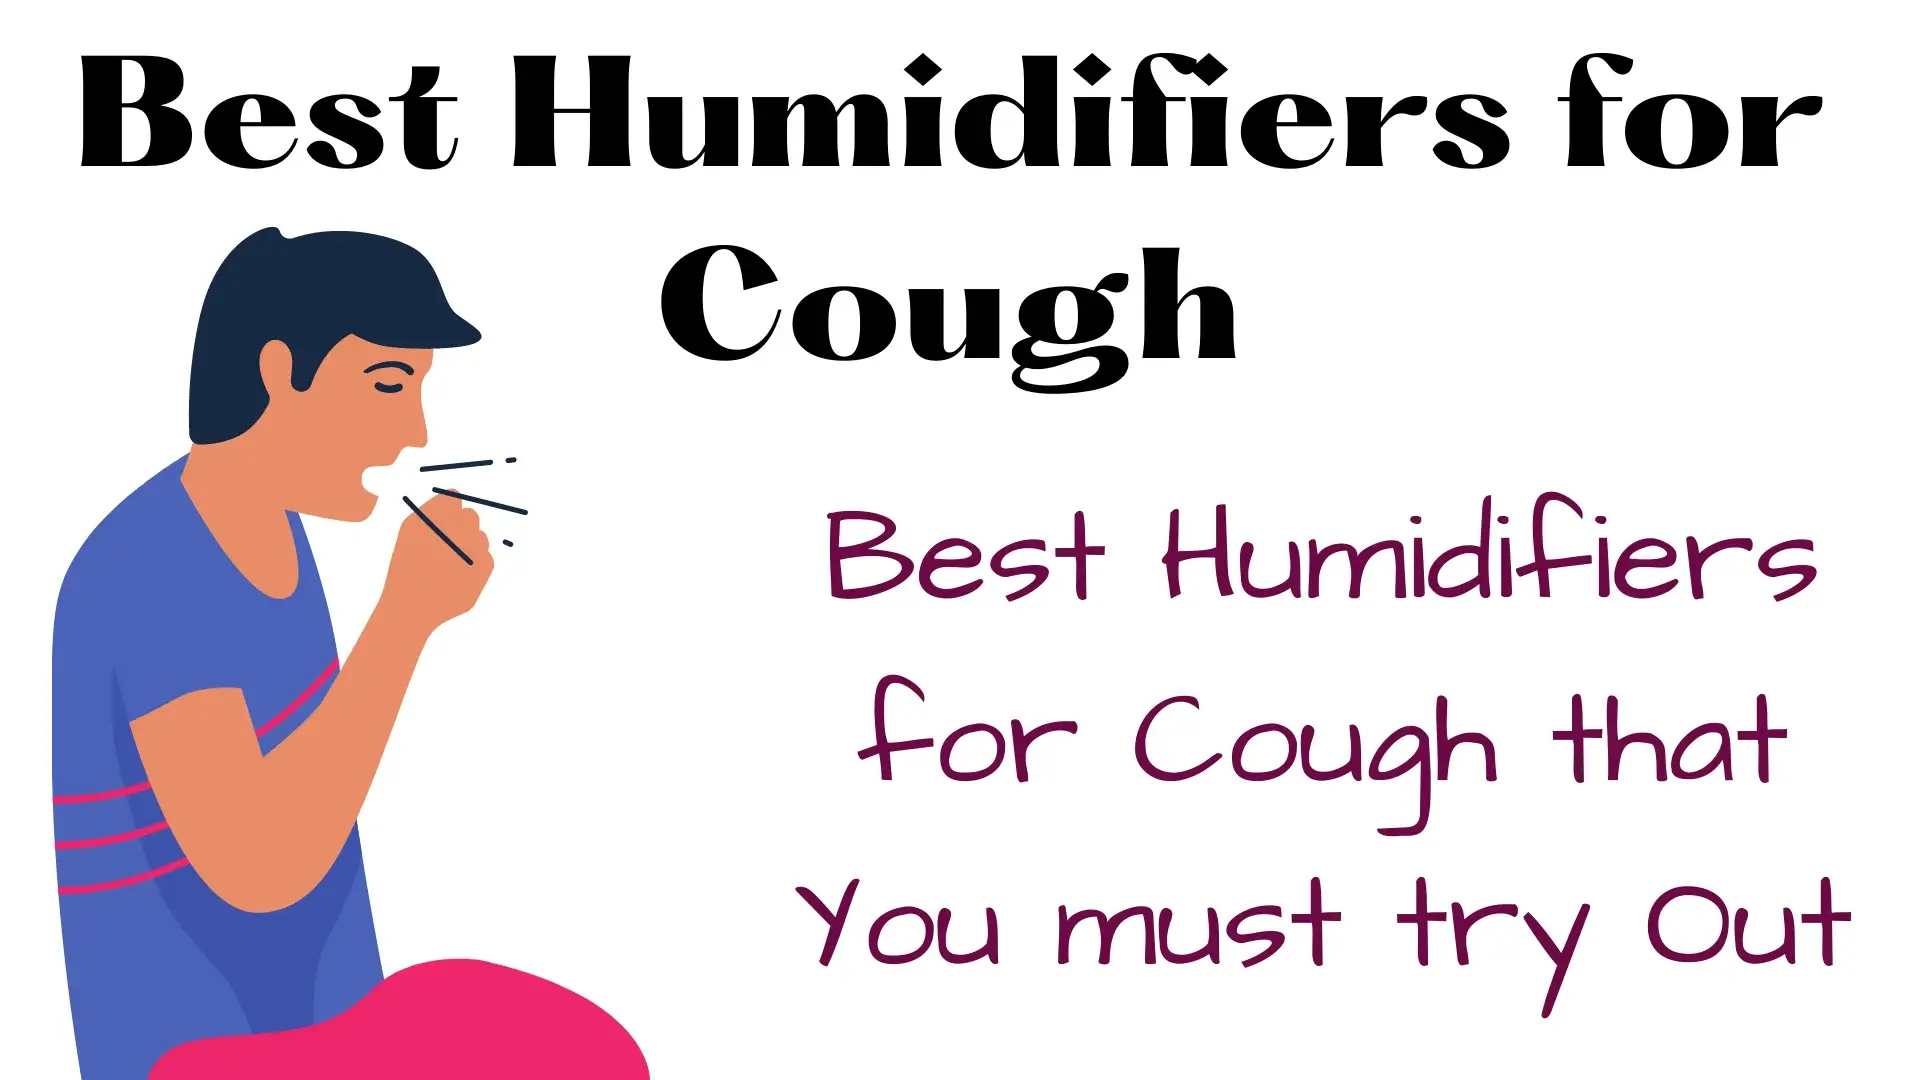 Best Humidifiers for Cough that You must try Out